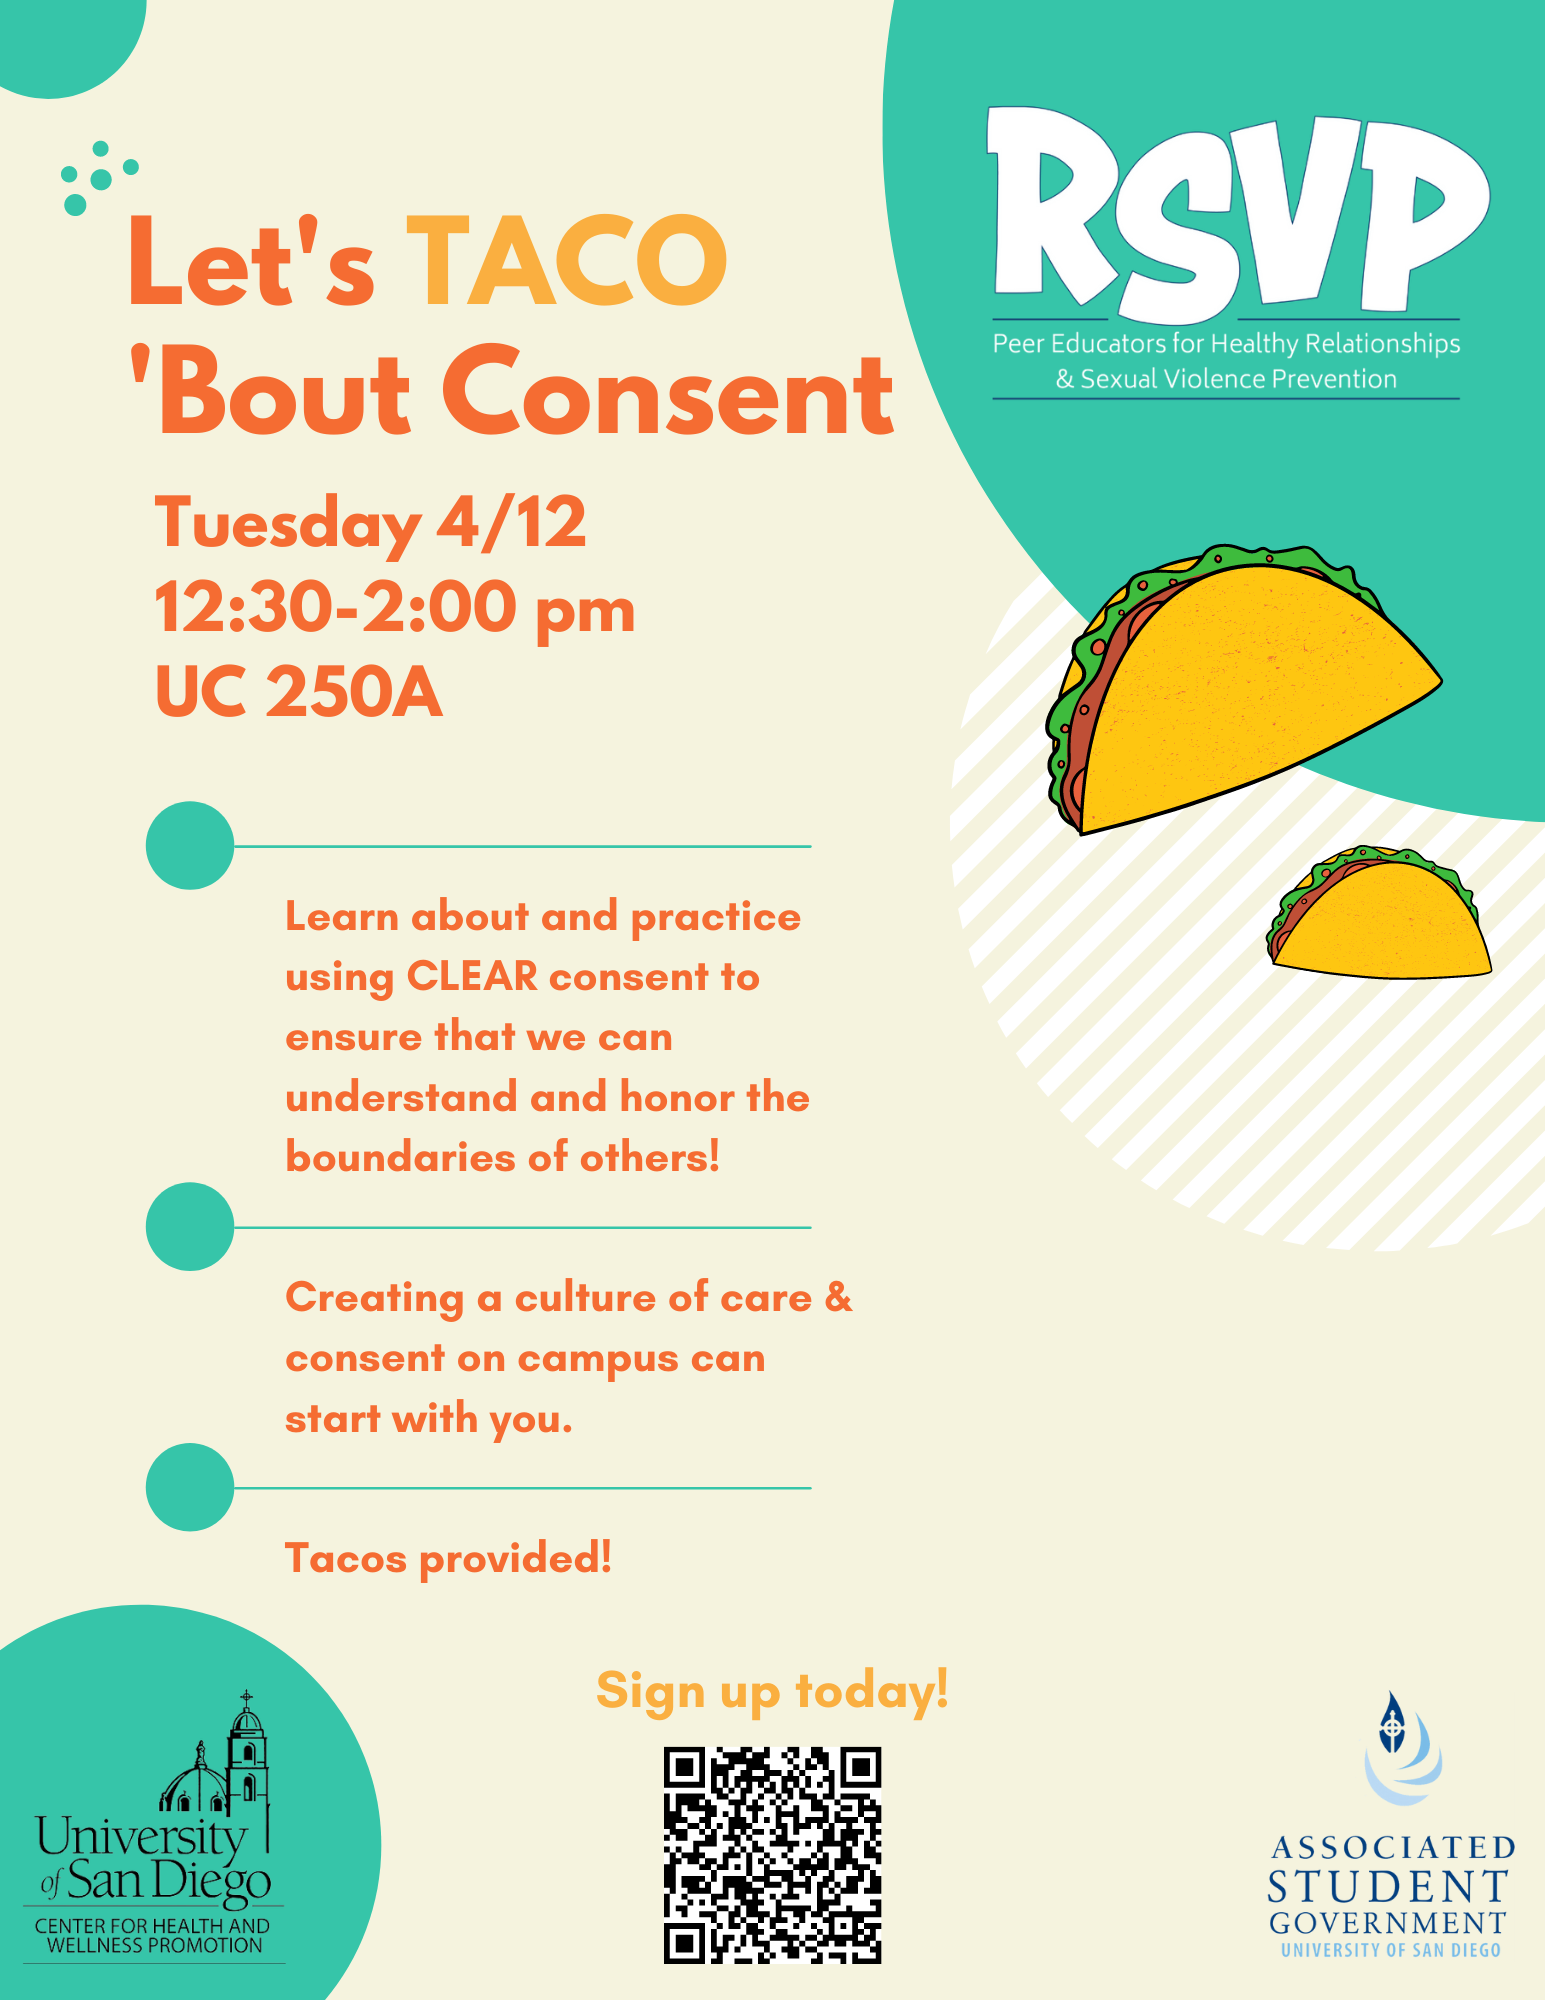 Flier with the following information: Let's TACO  'Bout Consent, Tuesday, April 12th, 12:30-2, University Center Forum A. Learn about and practice using CLEAR consent to ensure that we can understand and honor the boundaries of others!  Creating a culture of care & consent on campus can start with you. Tacos will be provided!